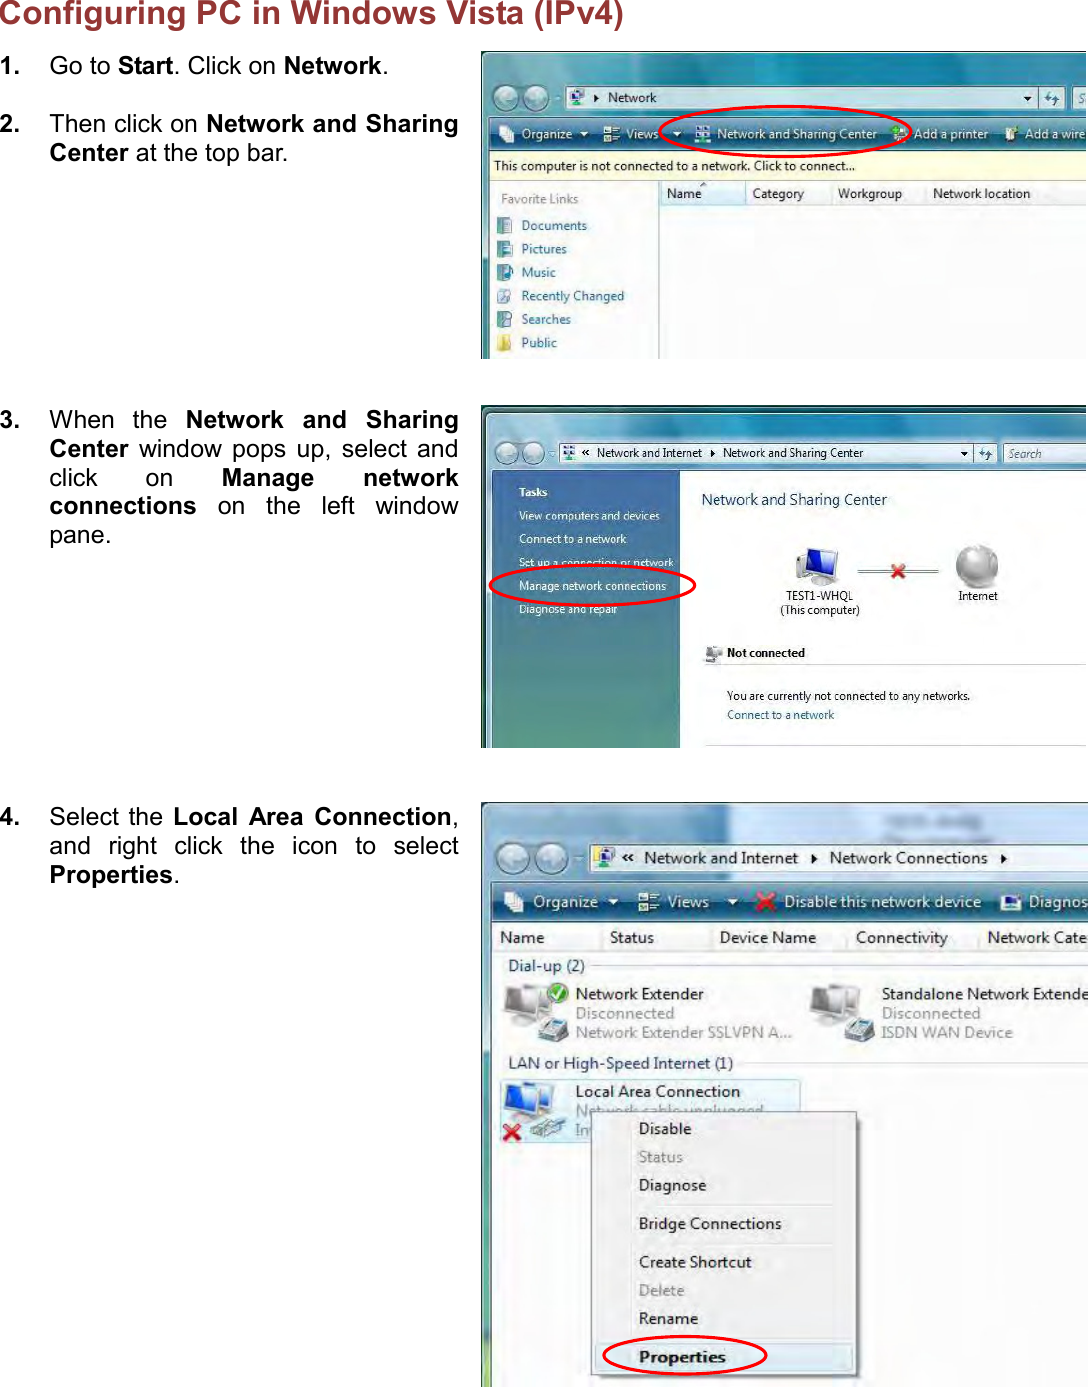    Configuring PC in Windows Vista (IPv4)  1. Go to Start. Click on Network.  2. Then click on Network and Sharing Center at the top bar.  3. When  the  Network  and  Sharing Center  window  pops  up,  select  and click  on  Manage  network connections  on  the  left  window pane.  4. Select the Local  Area  Connection, and  right  click  the  icon  to  select Properties.  